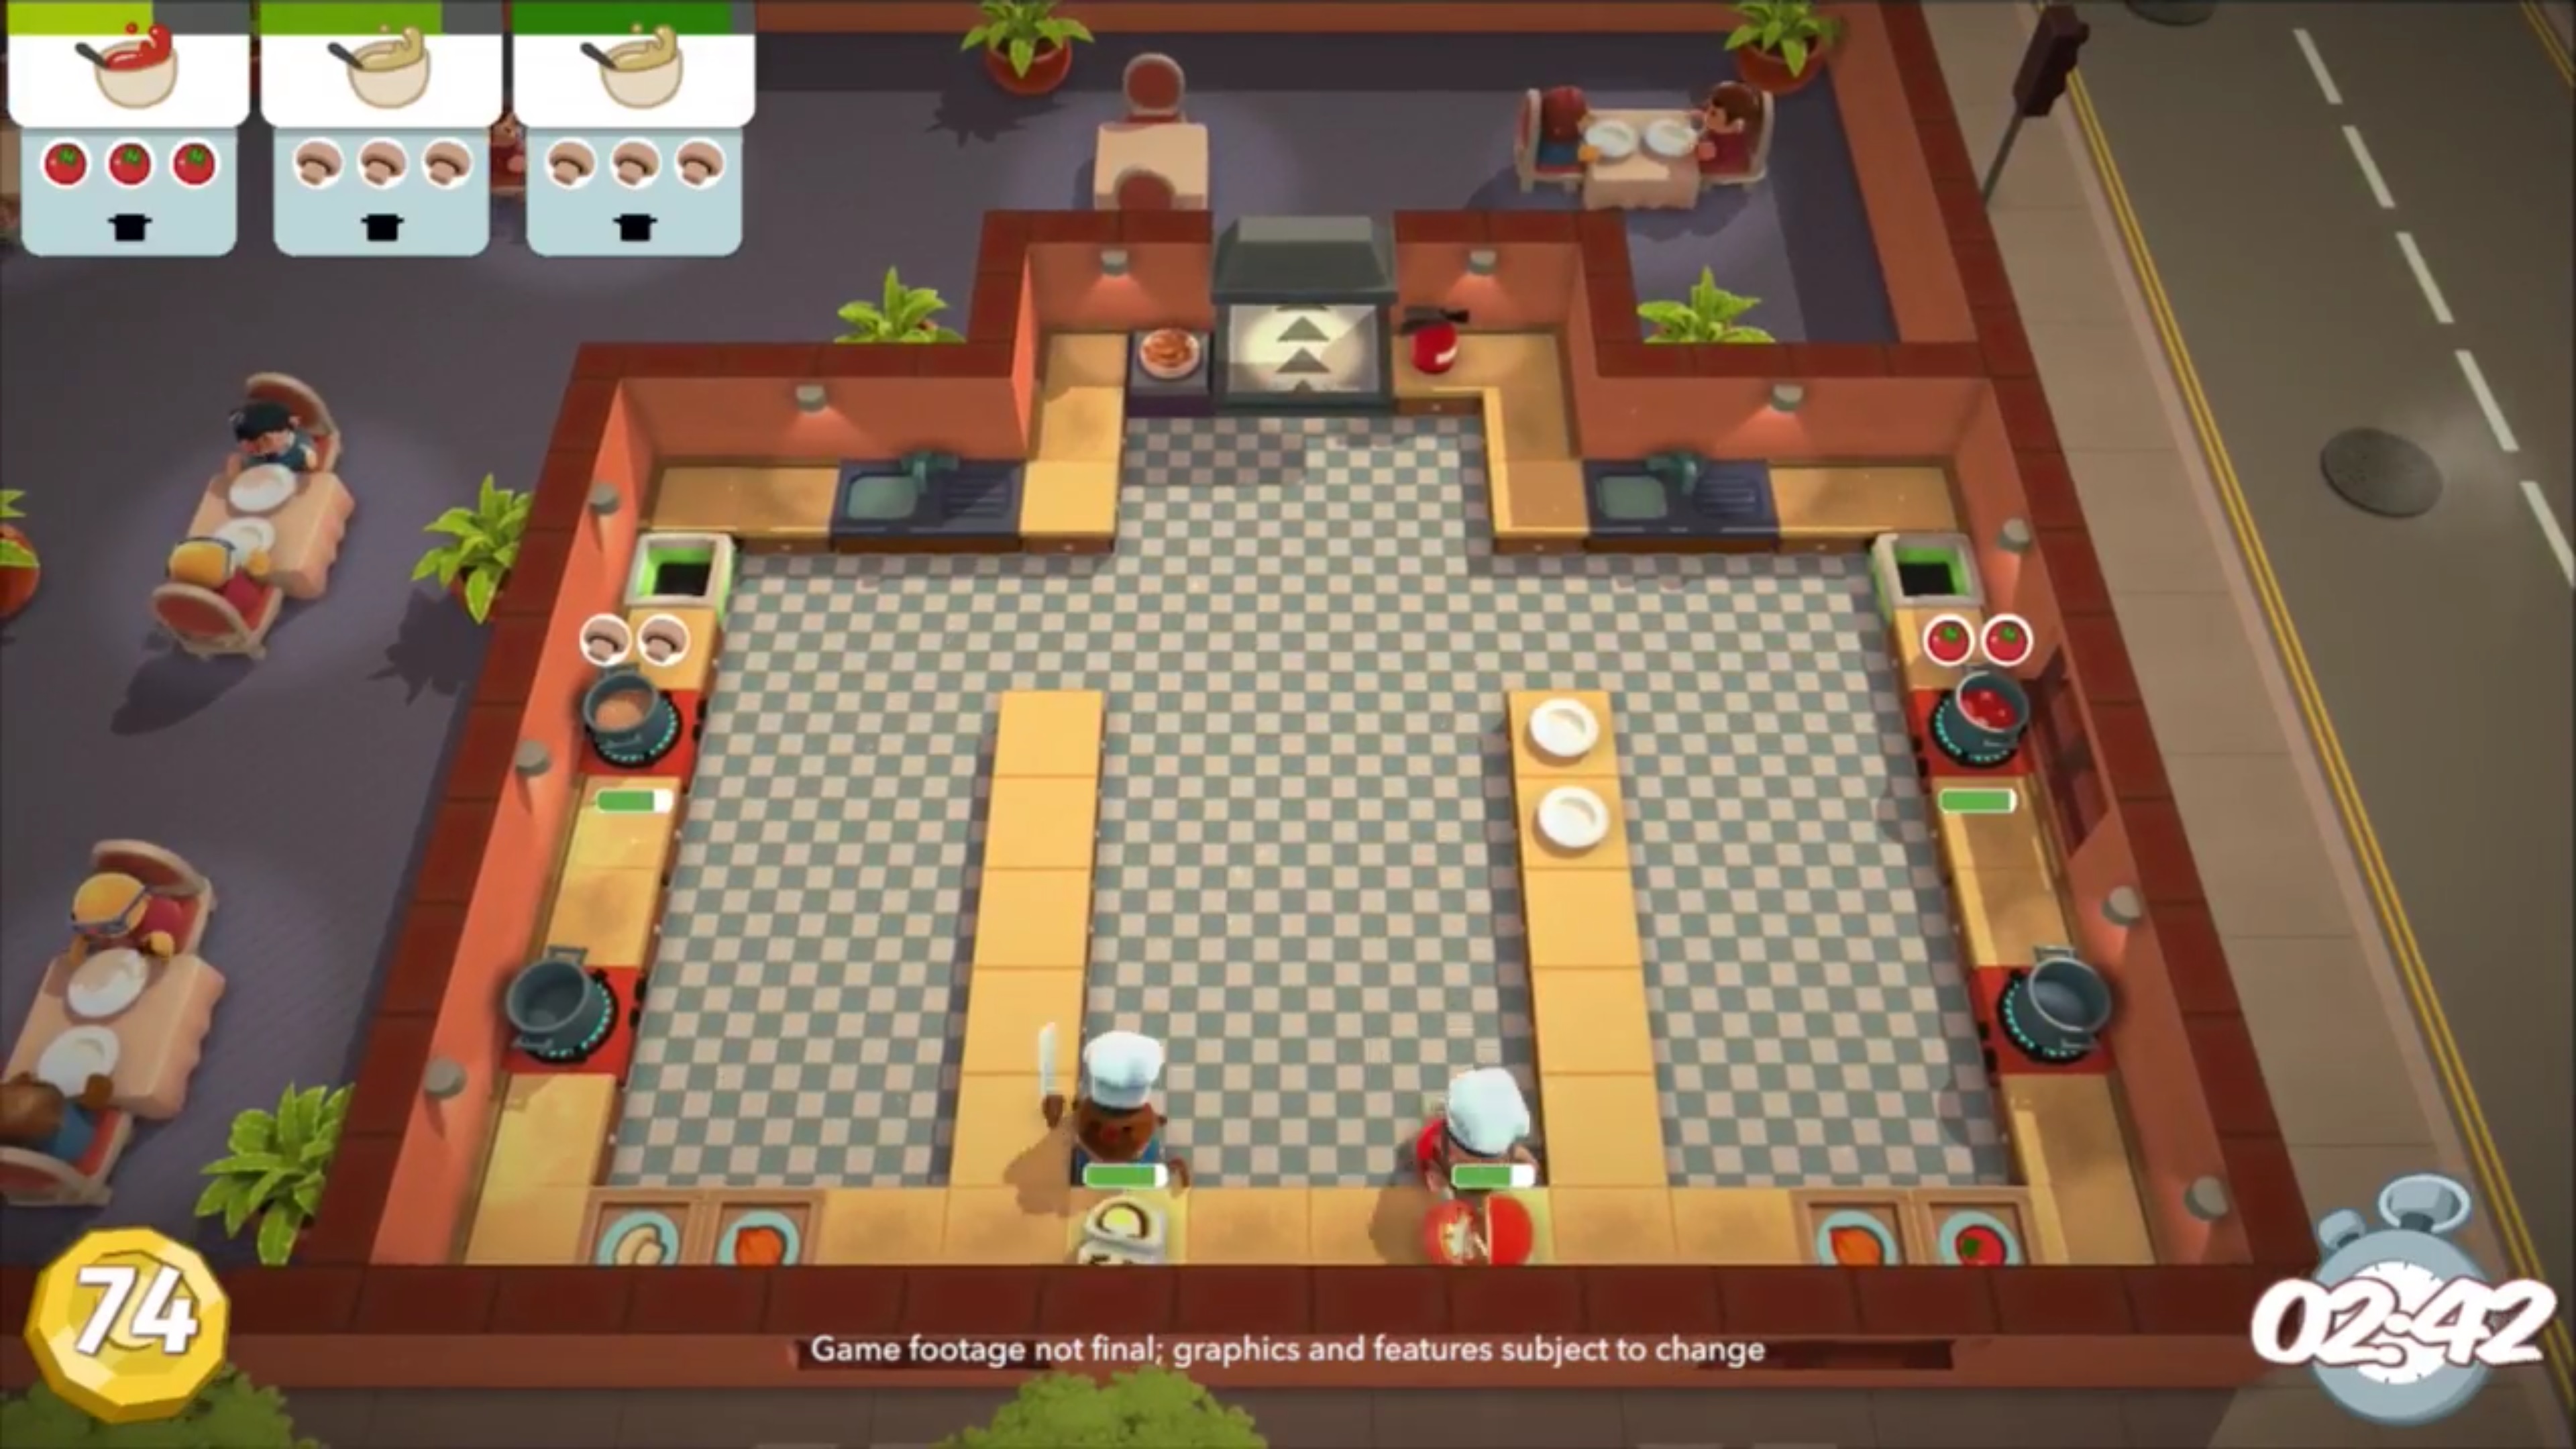 Overcooked: Special Edition, Escapists 2 coming to Switch